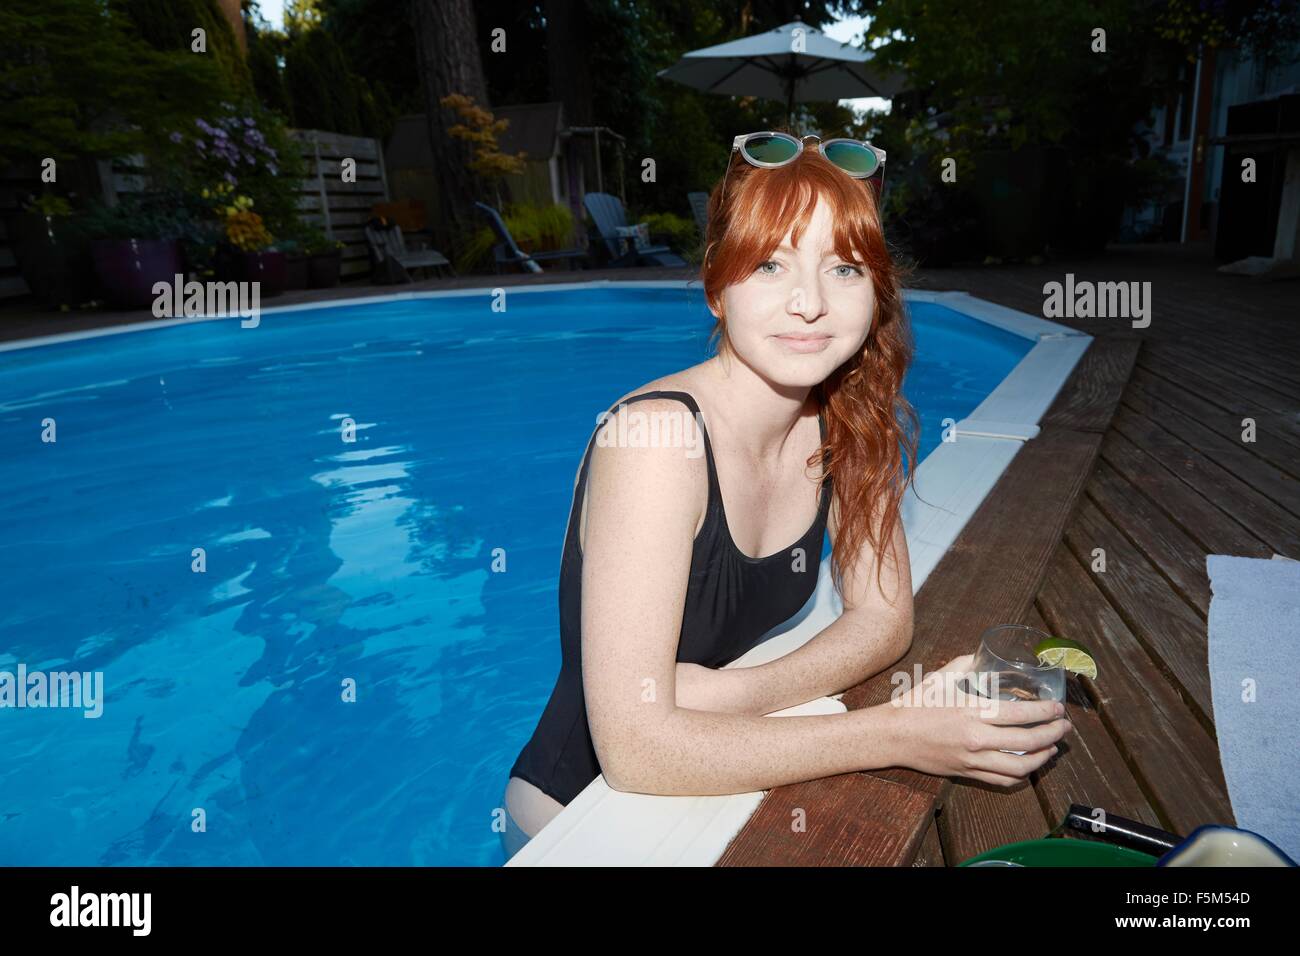 Portrait of young woman with long red hair in swimming pool at dusk Stock Photo